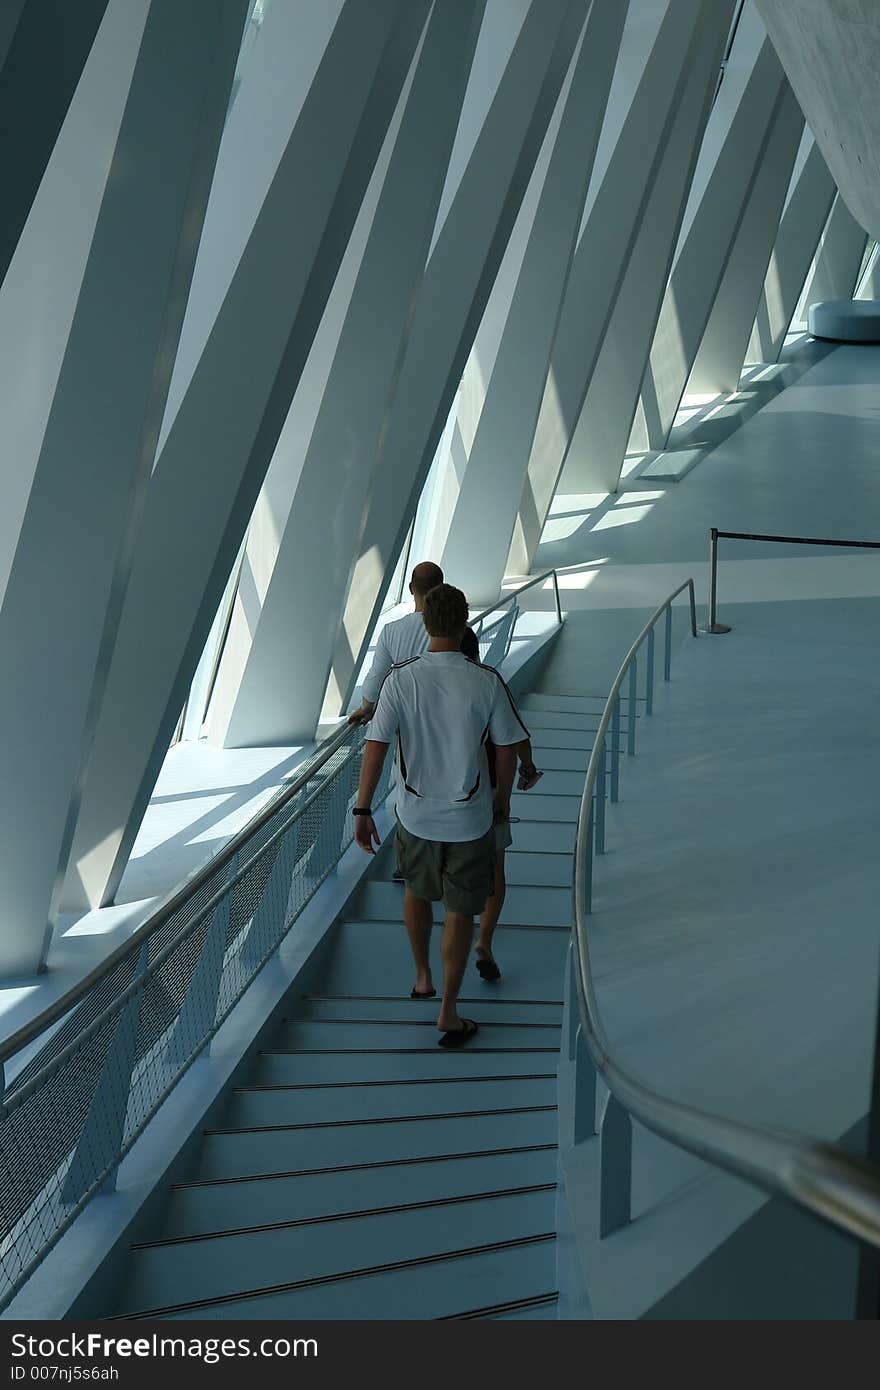 A group of people walking down a flight of stair in a modern building in Germany. A group of people walking down a flight of stair in a modern building in Germany.